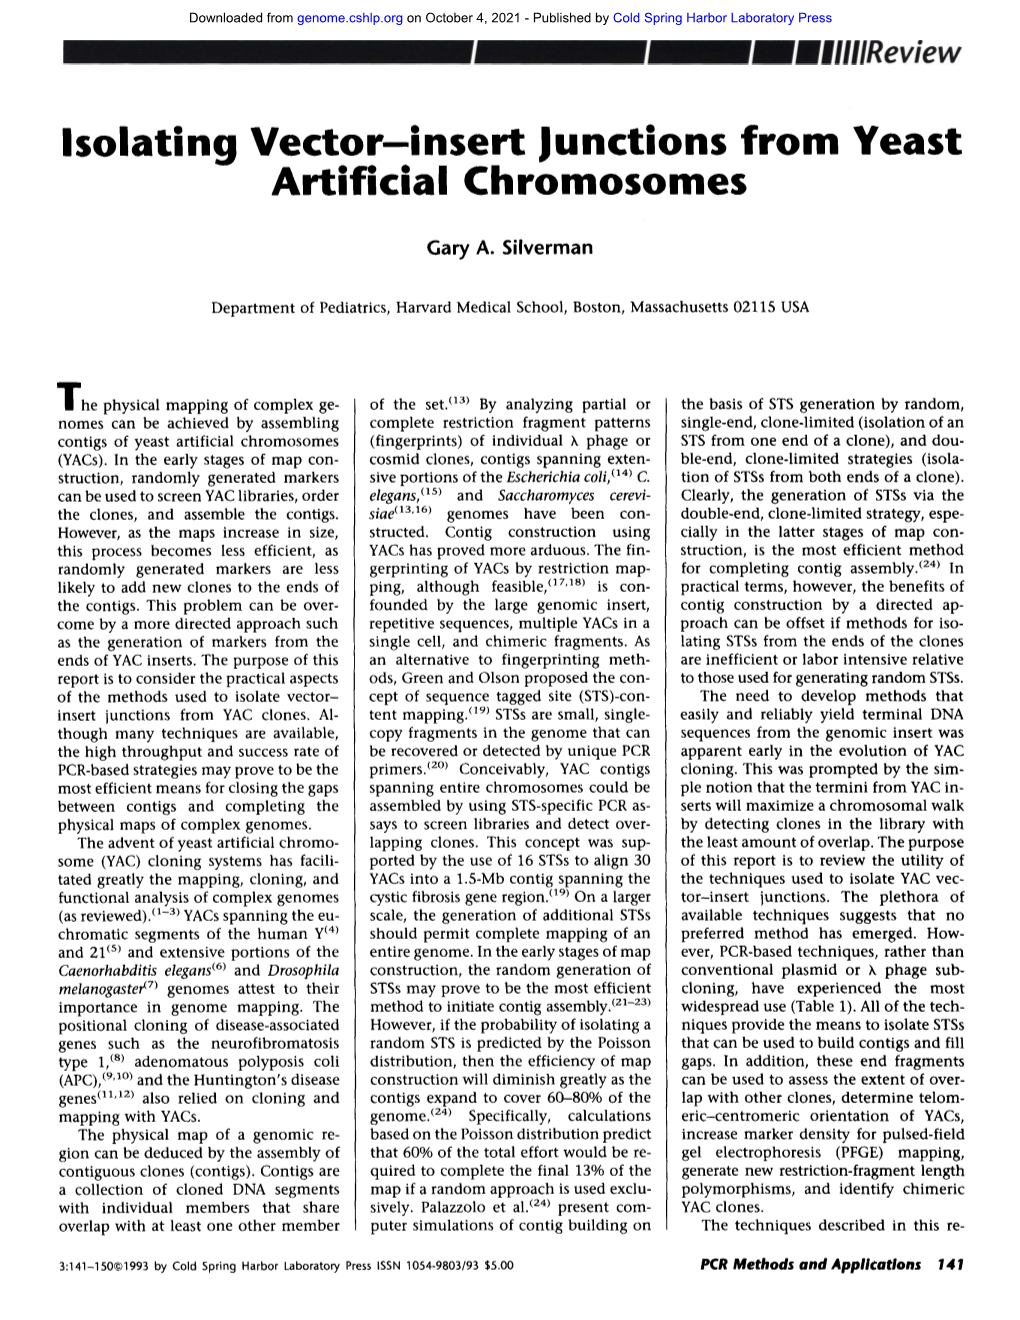 Isolating Vector Insert Junctions from Yeast Arttflctal Chromosomes